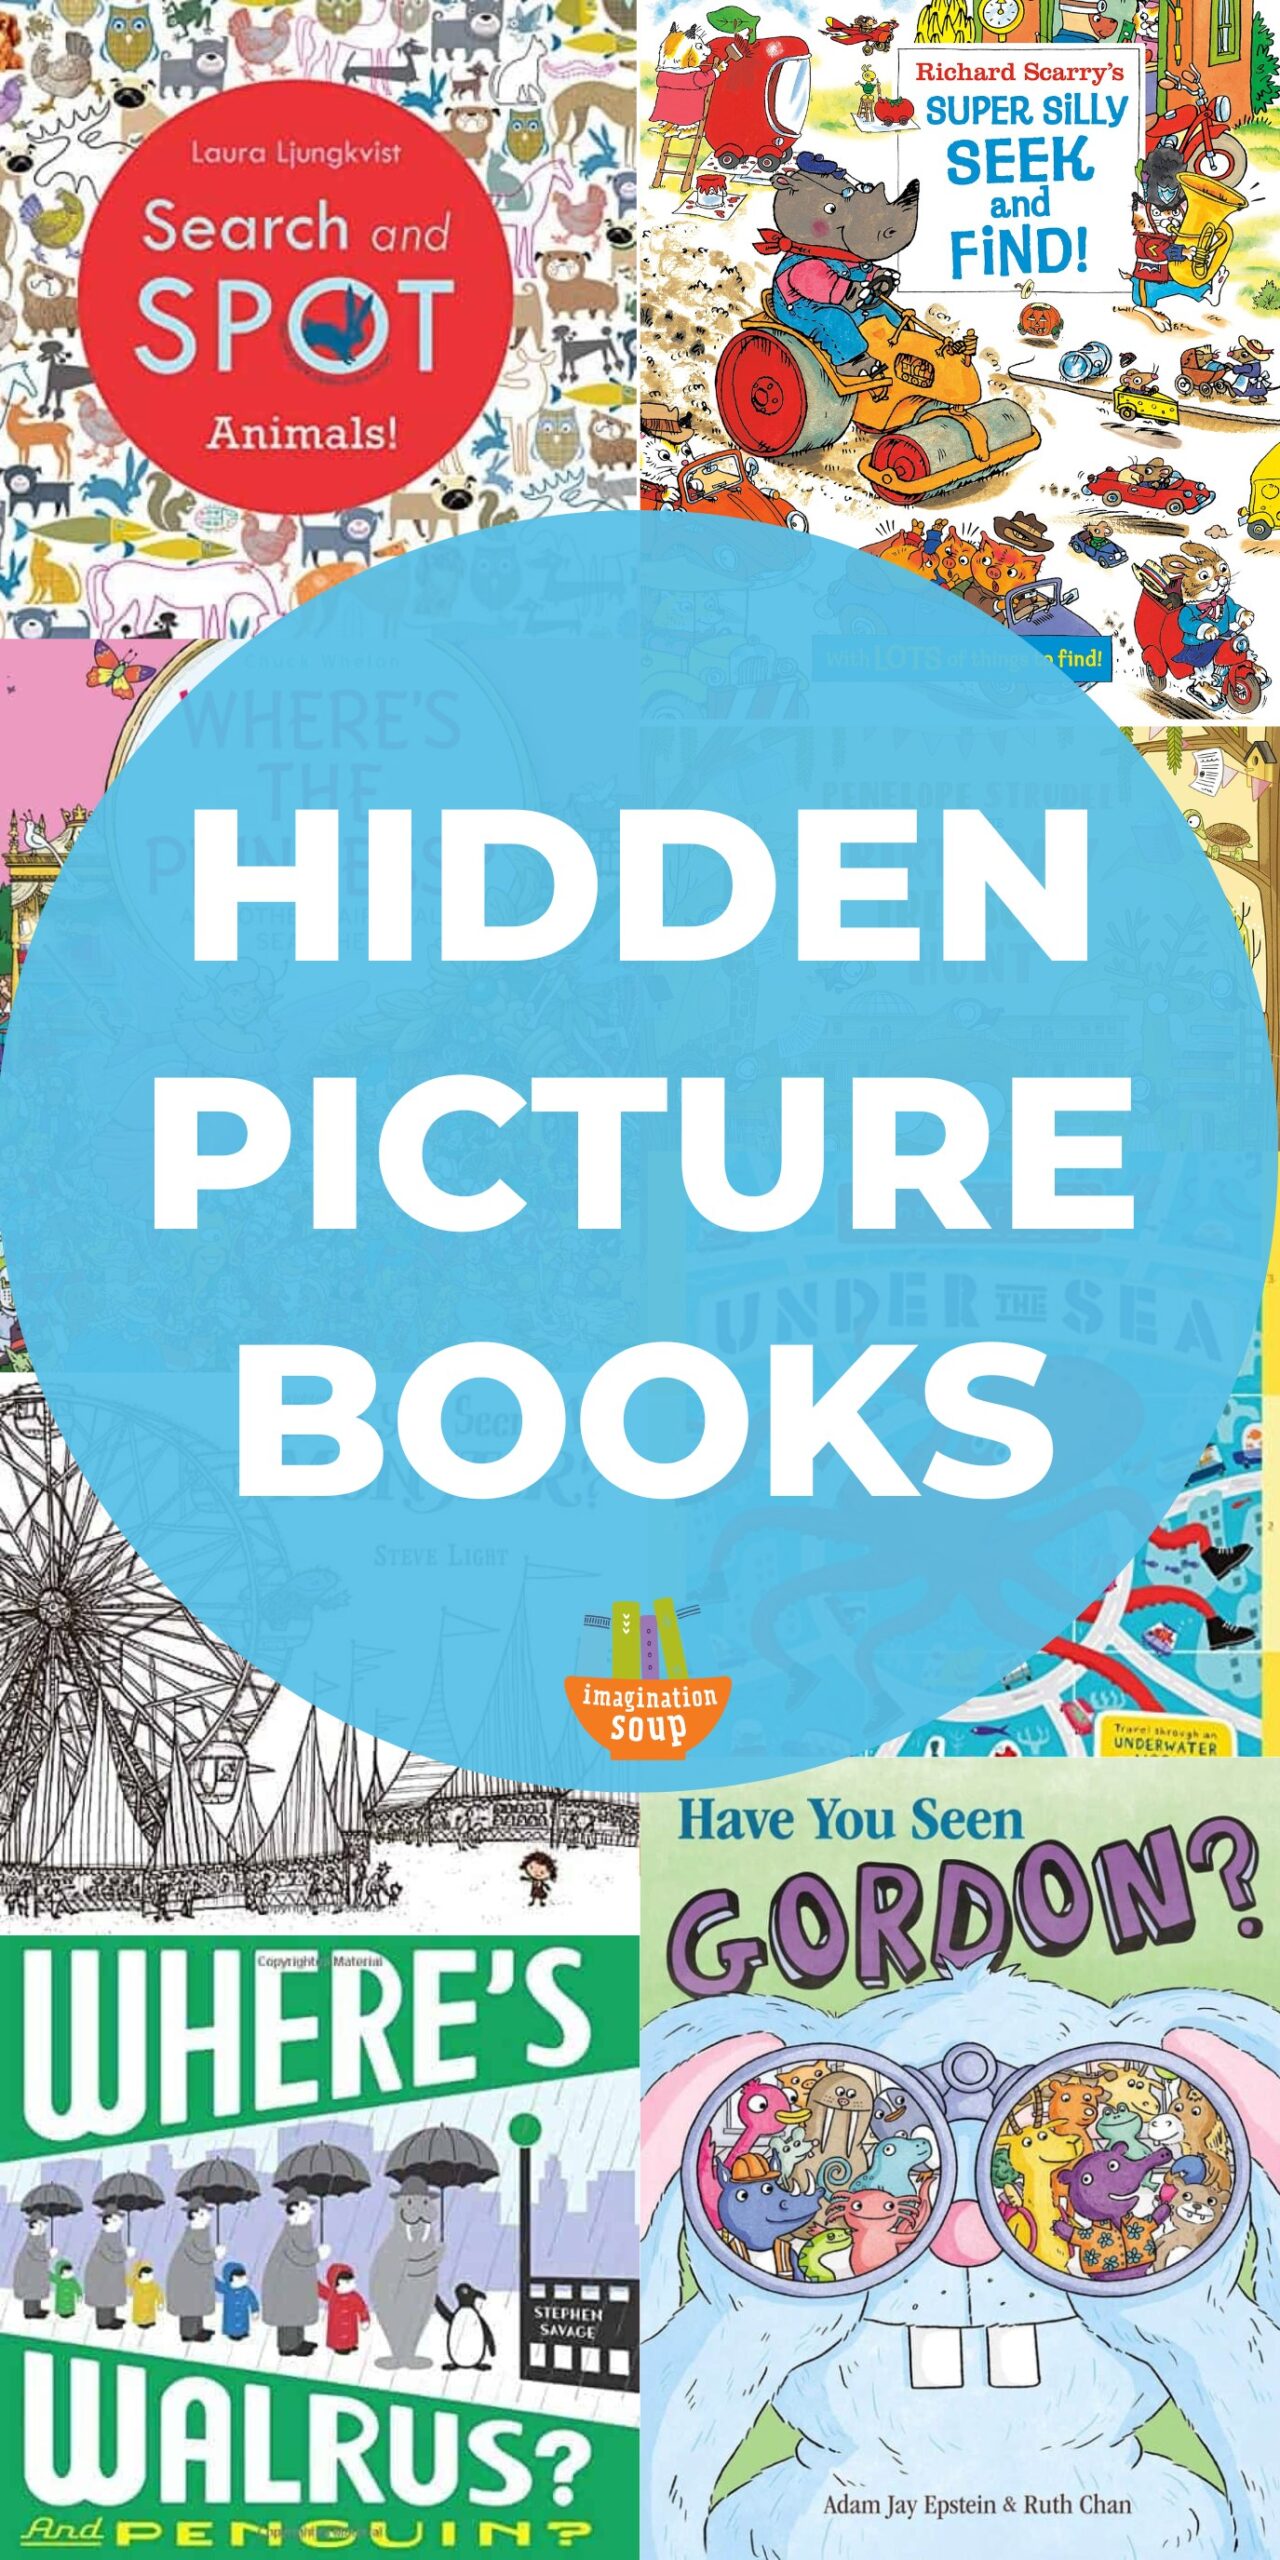 One of the best things about hidden picture books (also called seek-and-find and search-and-find books) is that the books are engaging and are fun ways to spend quality parent-child time. 